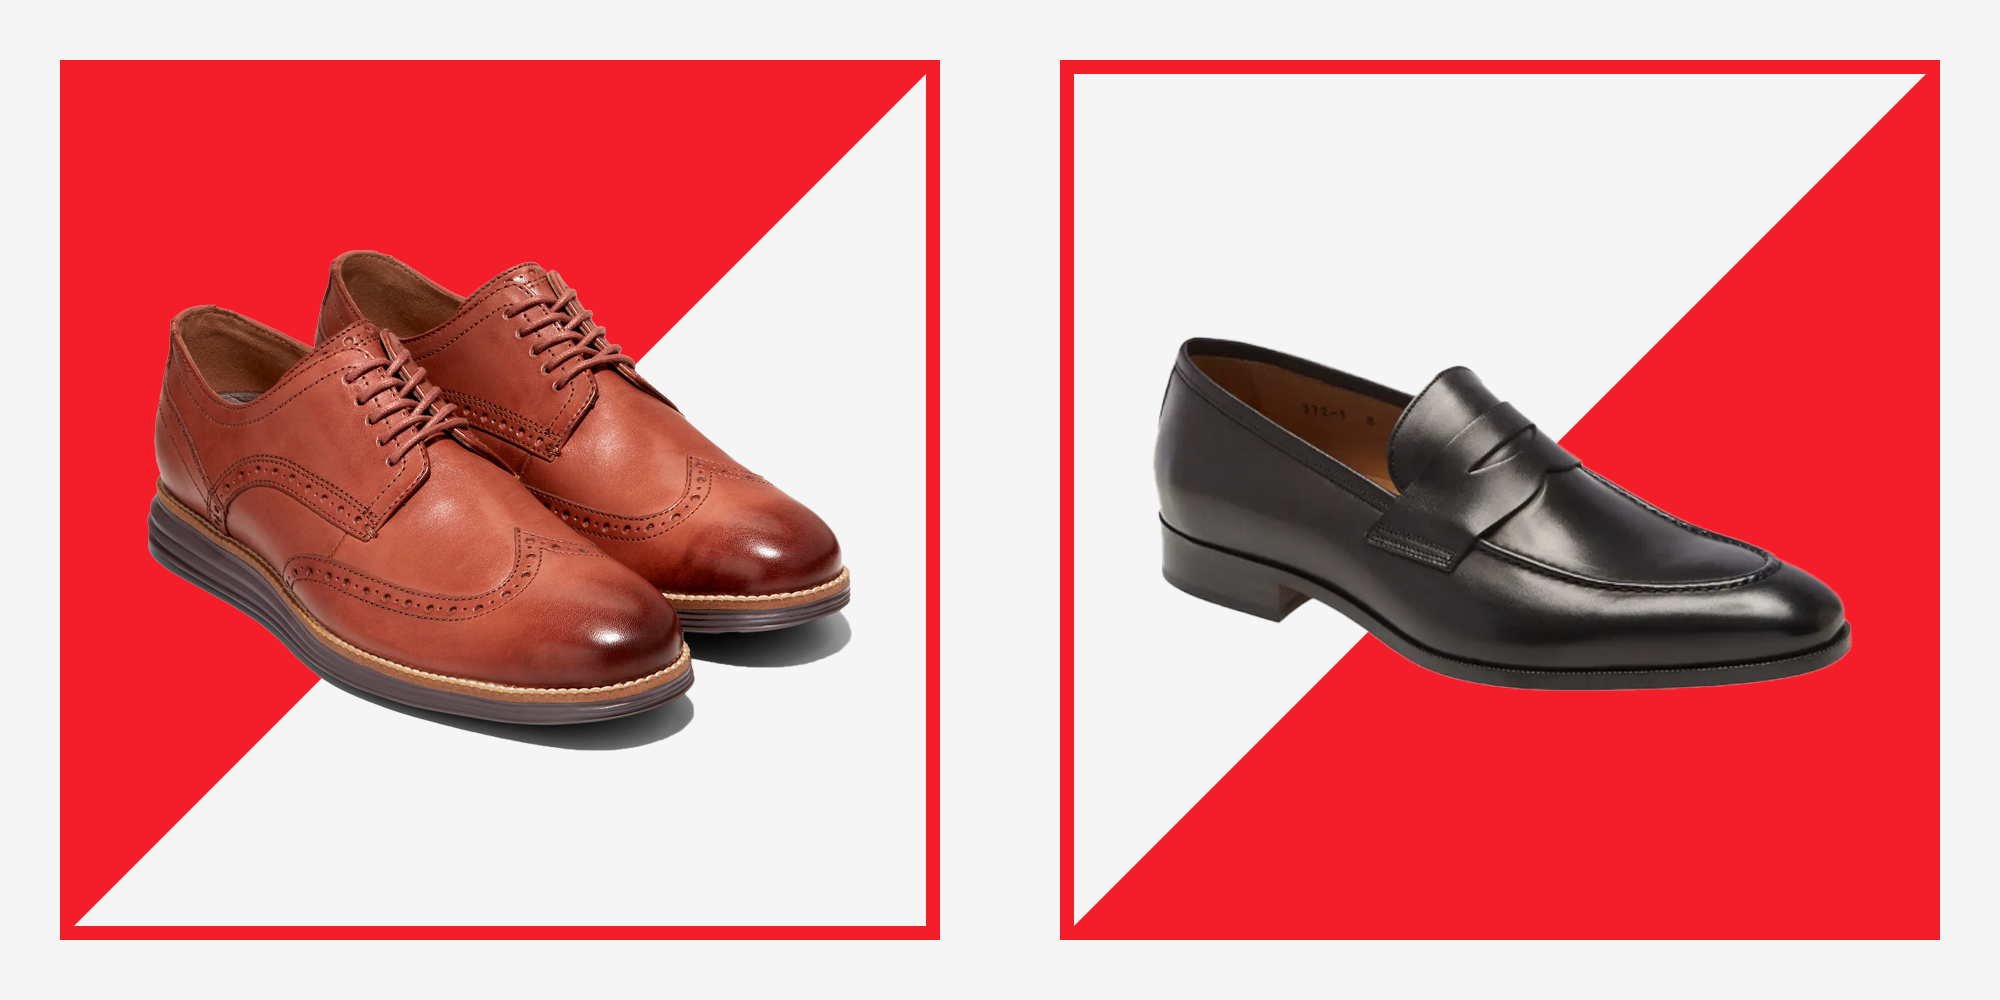 Found: Podiatrist-Approved Dress Shoes for Heel Pain